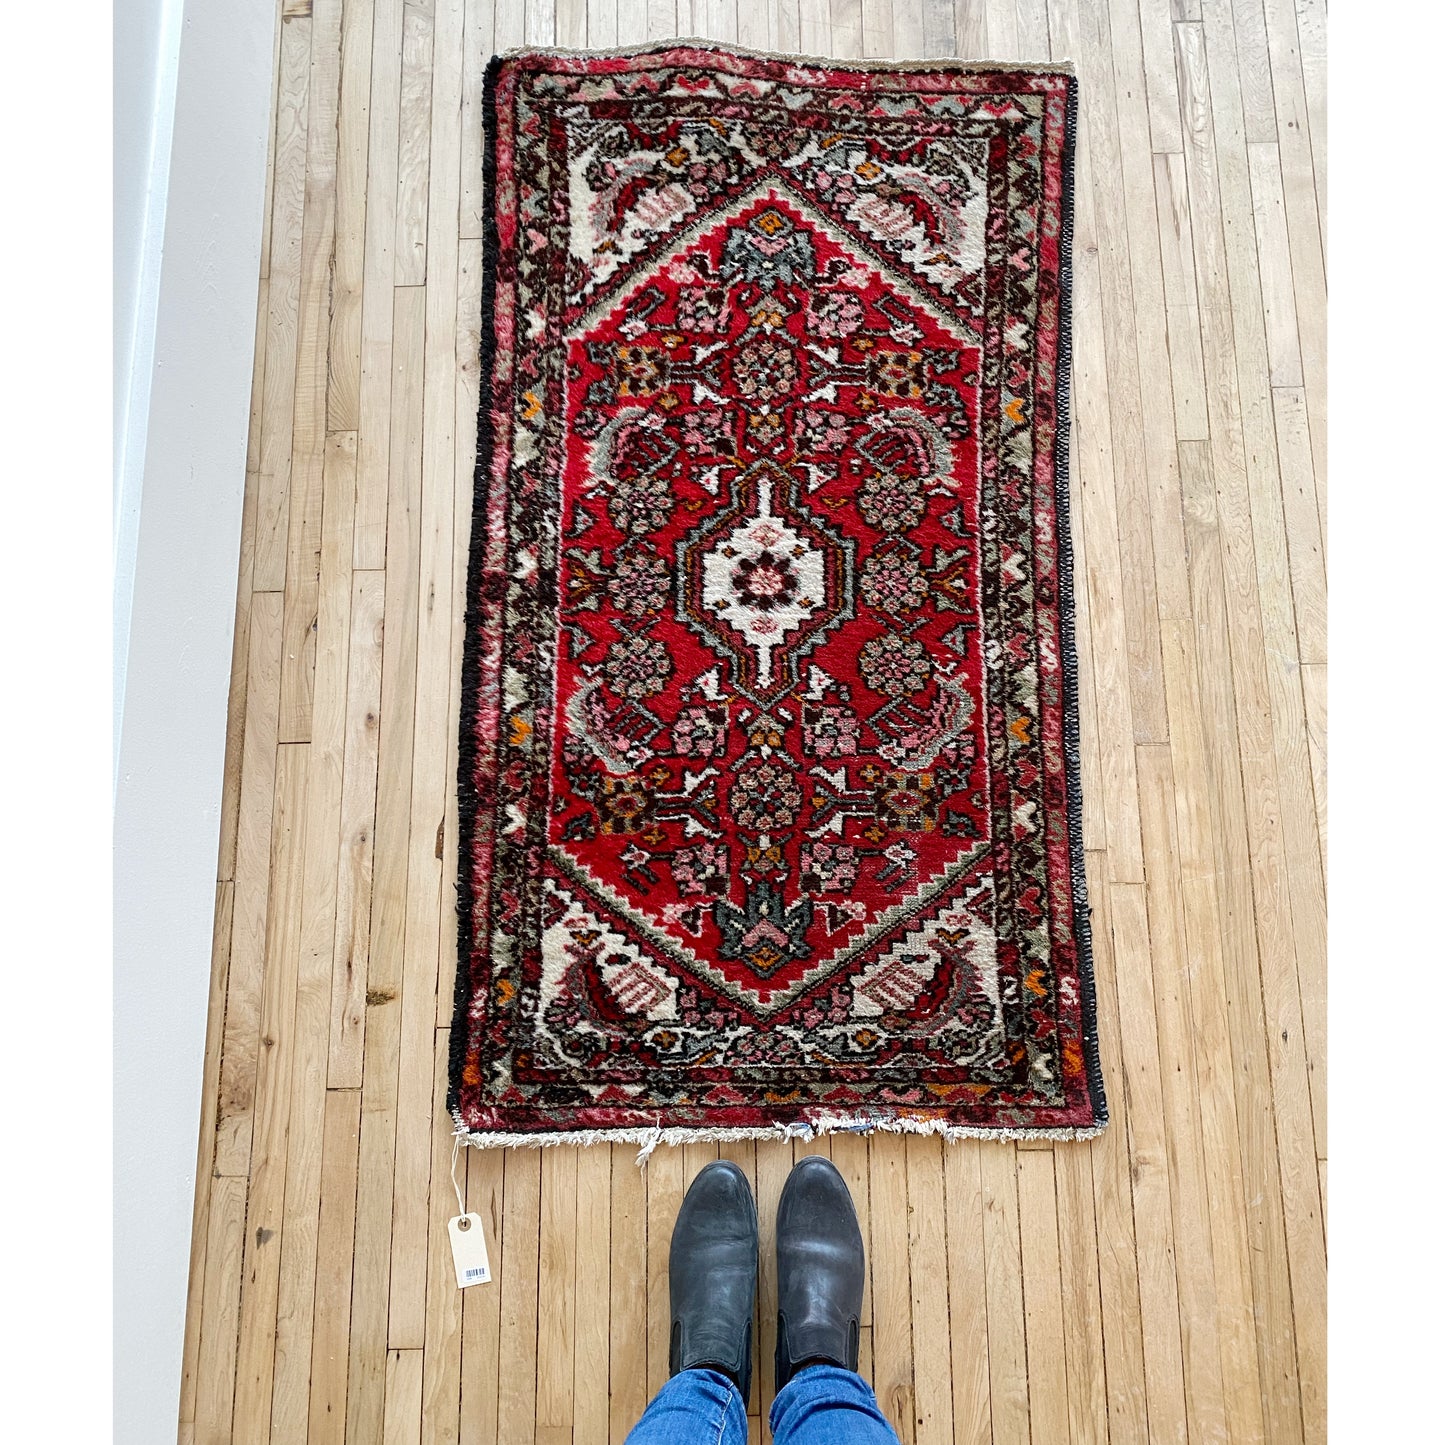 "ELAINE" Vintage Hand-knotted Rug (2'3" x 4'2")